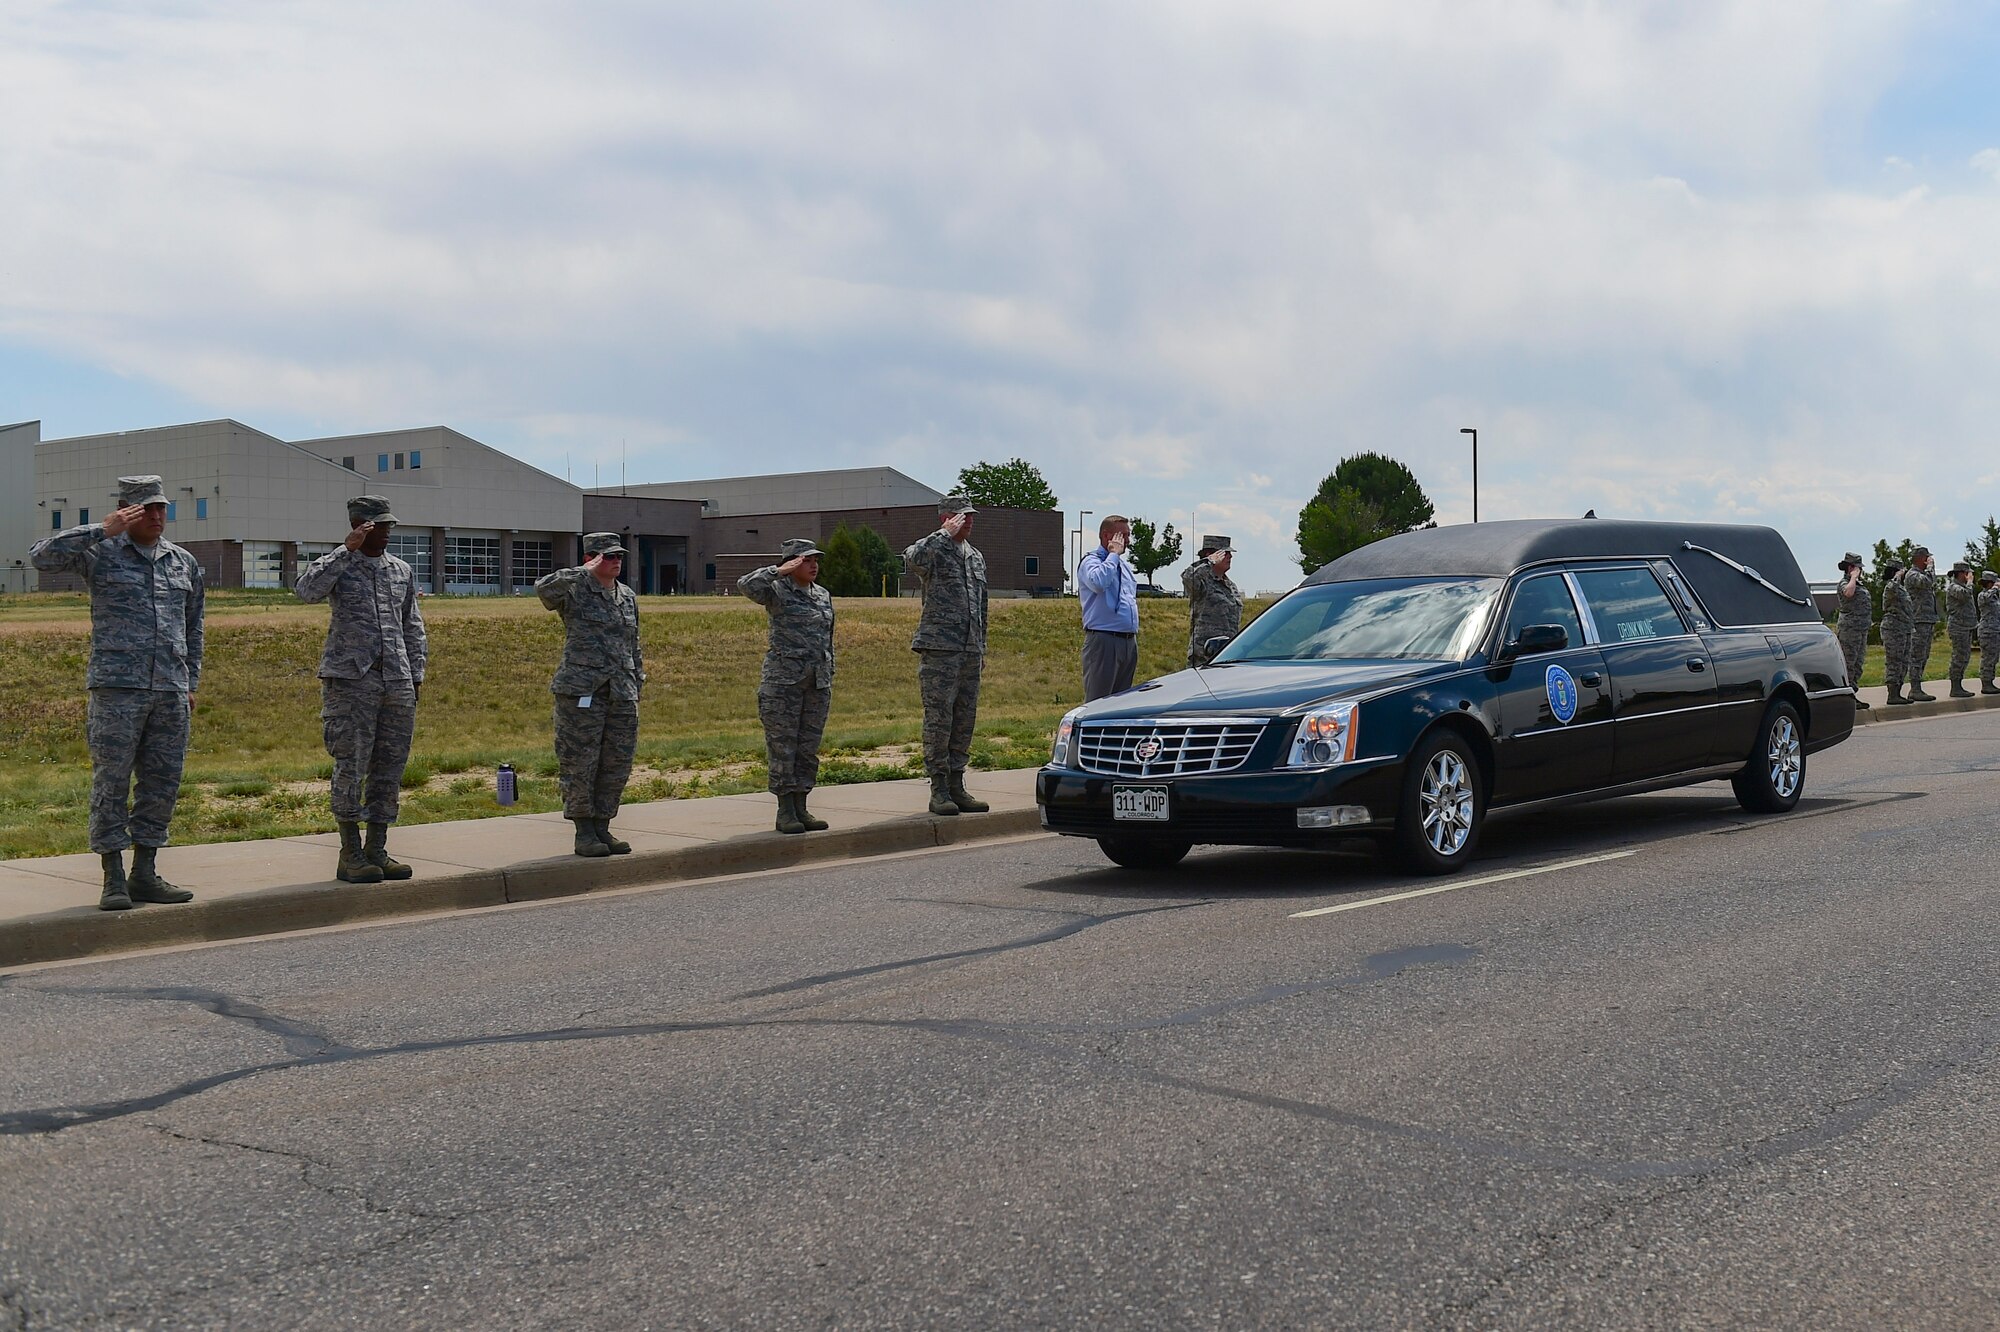 Members of Team Buckley render a final salute to Major Elgin Ross, Chief, Total Force Service Center, assigned to Headquarters Air Reserve Personnel Center, June 27, 2017, on Buckley Air Force Base, Colo. Ross tragically passed away after becoming unresponsive while conducting his physical training test on June 16. The Buckley community paid their last respects to Ross and his family at a funeral procession on Aspen Street, from the Mississippi Gate to the 6th Avenue Gate. (U.S. Air Force photo by Airman Jacob Deatherage/Released)